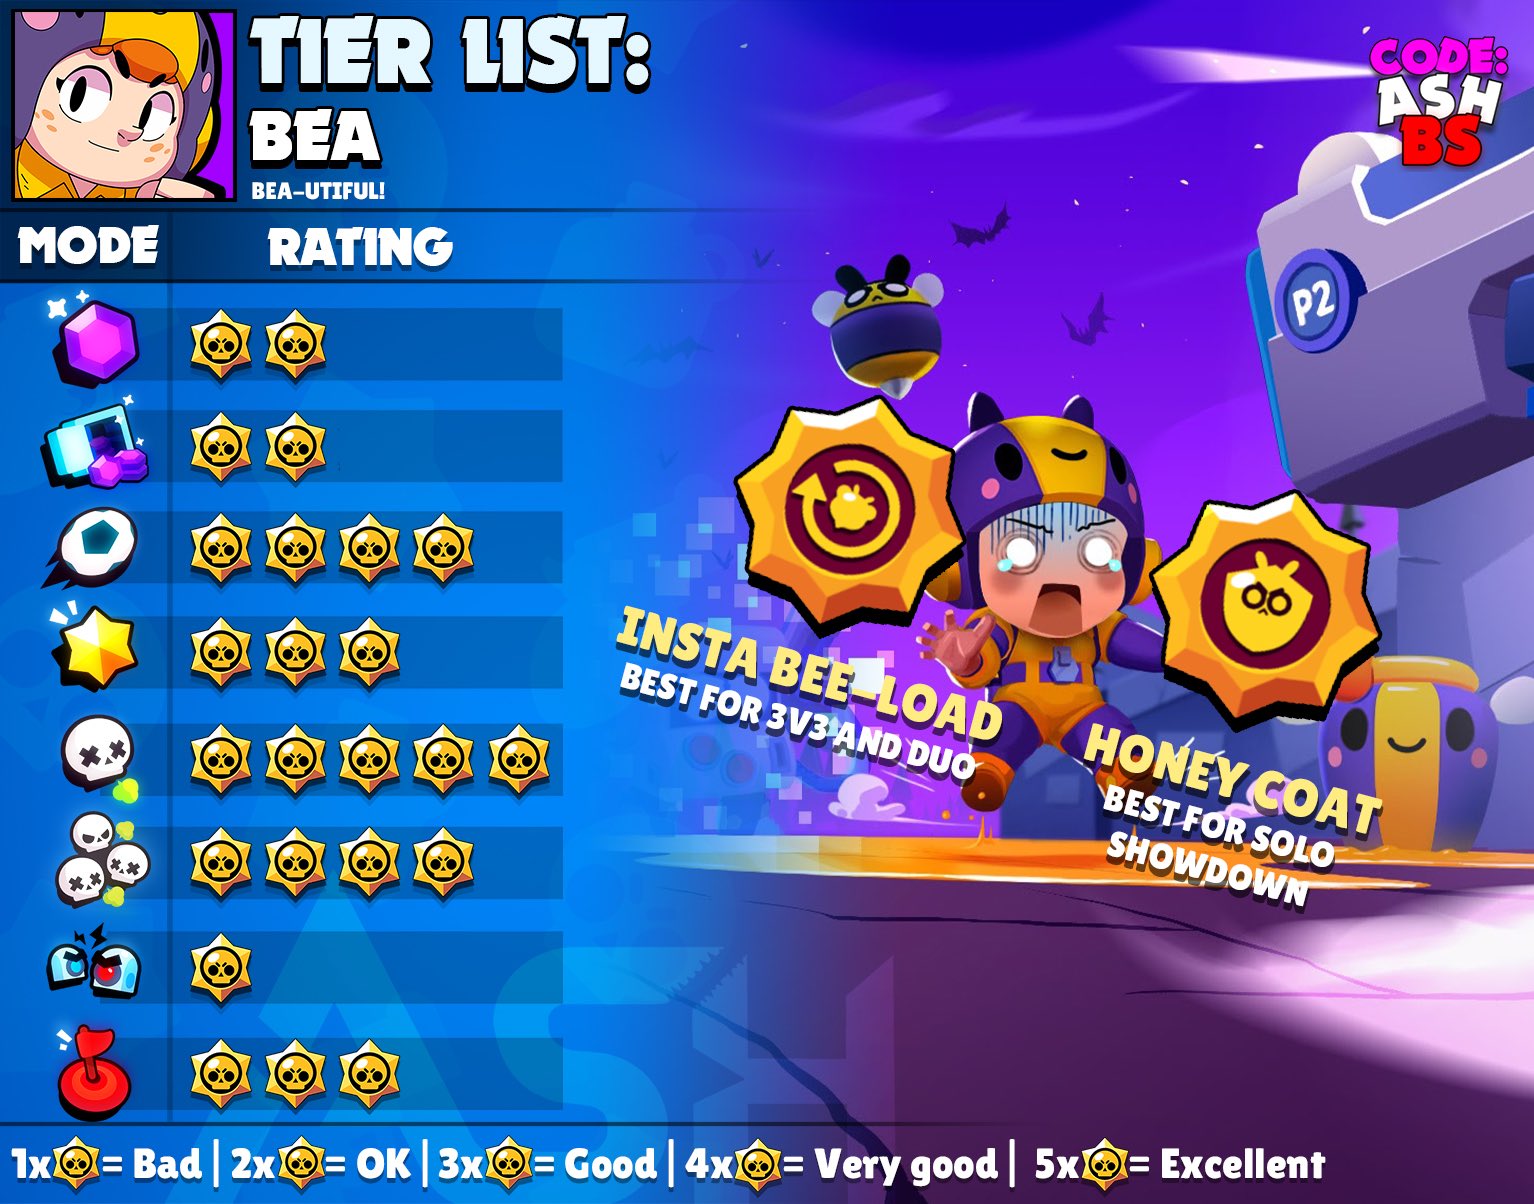 Code Ashbs Ar Twitter Bea Tier List For All Game Modes And The Best Maps To Use Her In With Suggested Comps Which Brawler Should I Do Next Brawlstars Https T Co 6i1klls8y9 - bibi nua brawl stars